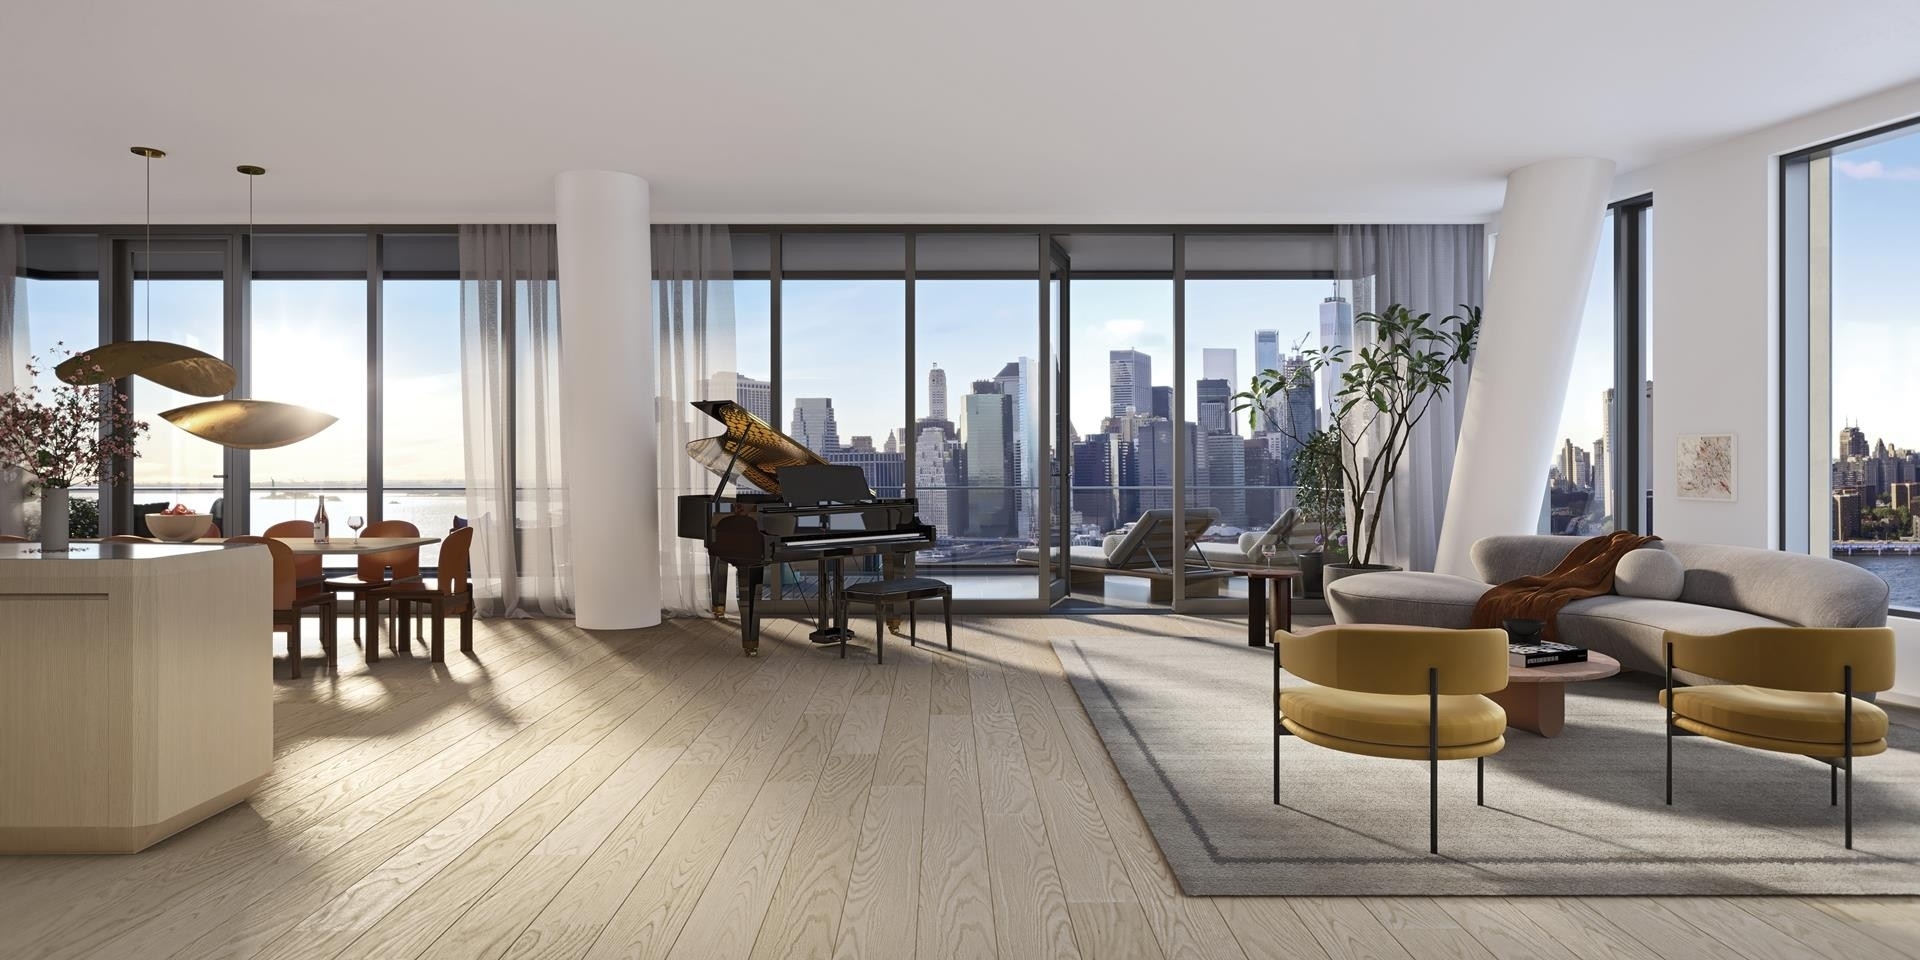 1. Condominiums for Sale at Olympia Dumbo, 30 FRONT ST, 17A Brooklyn, New York 11201